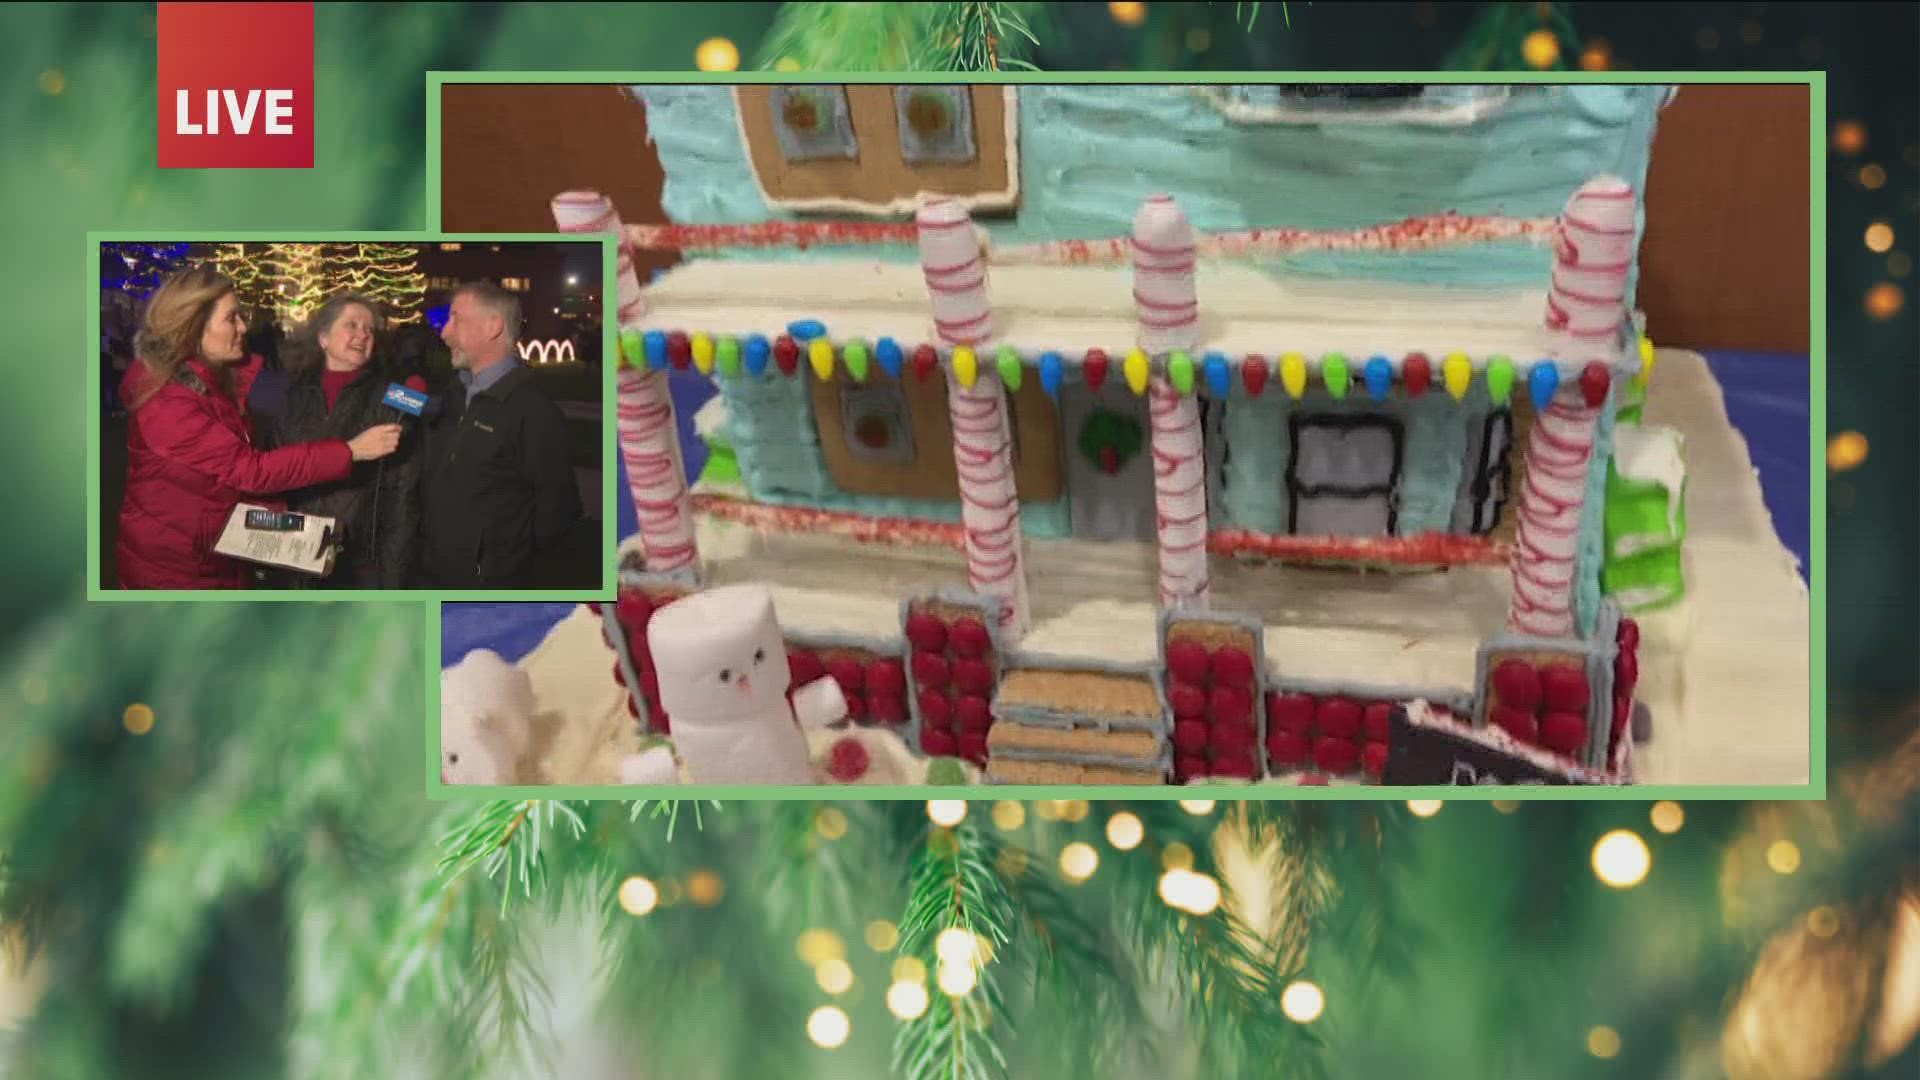 Dan and Nancy Kester talk about their gingerbread house, the Kevin guesthouse.